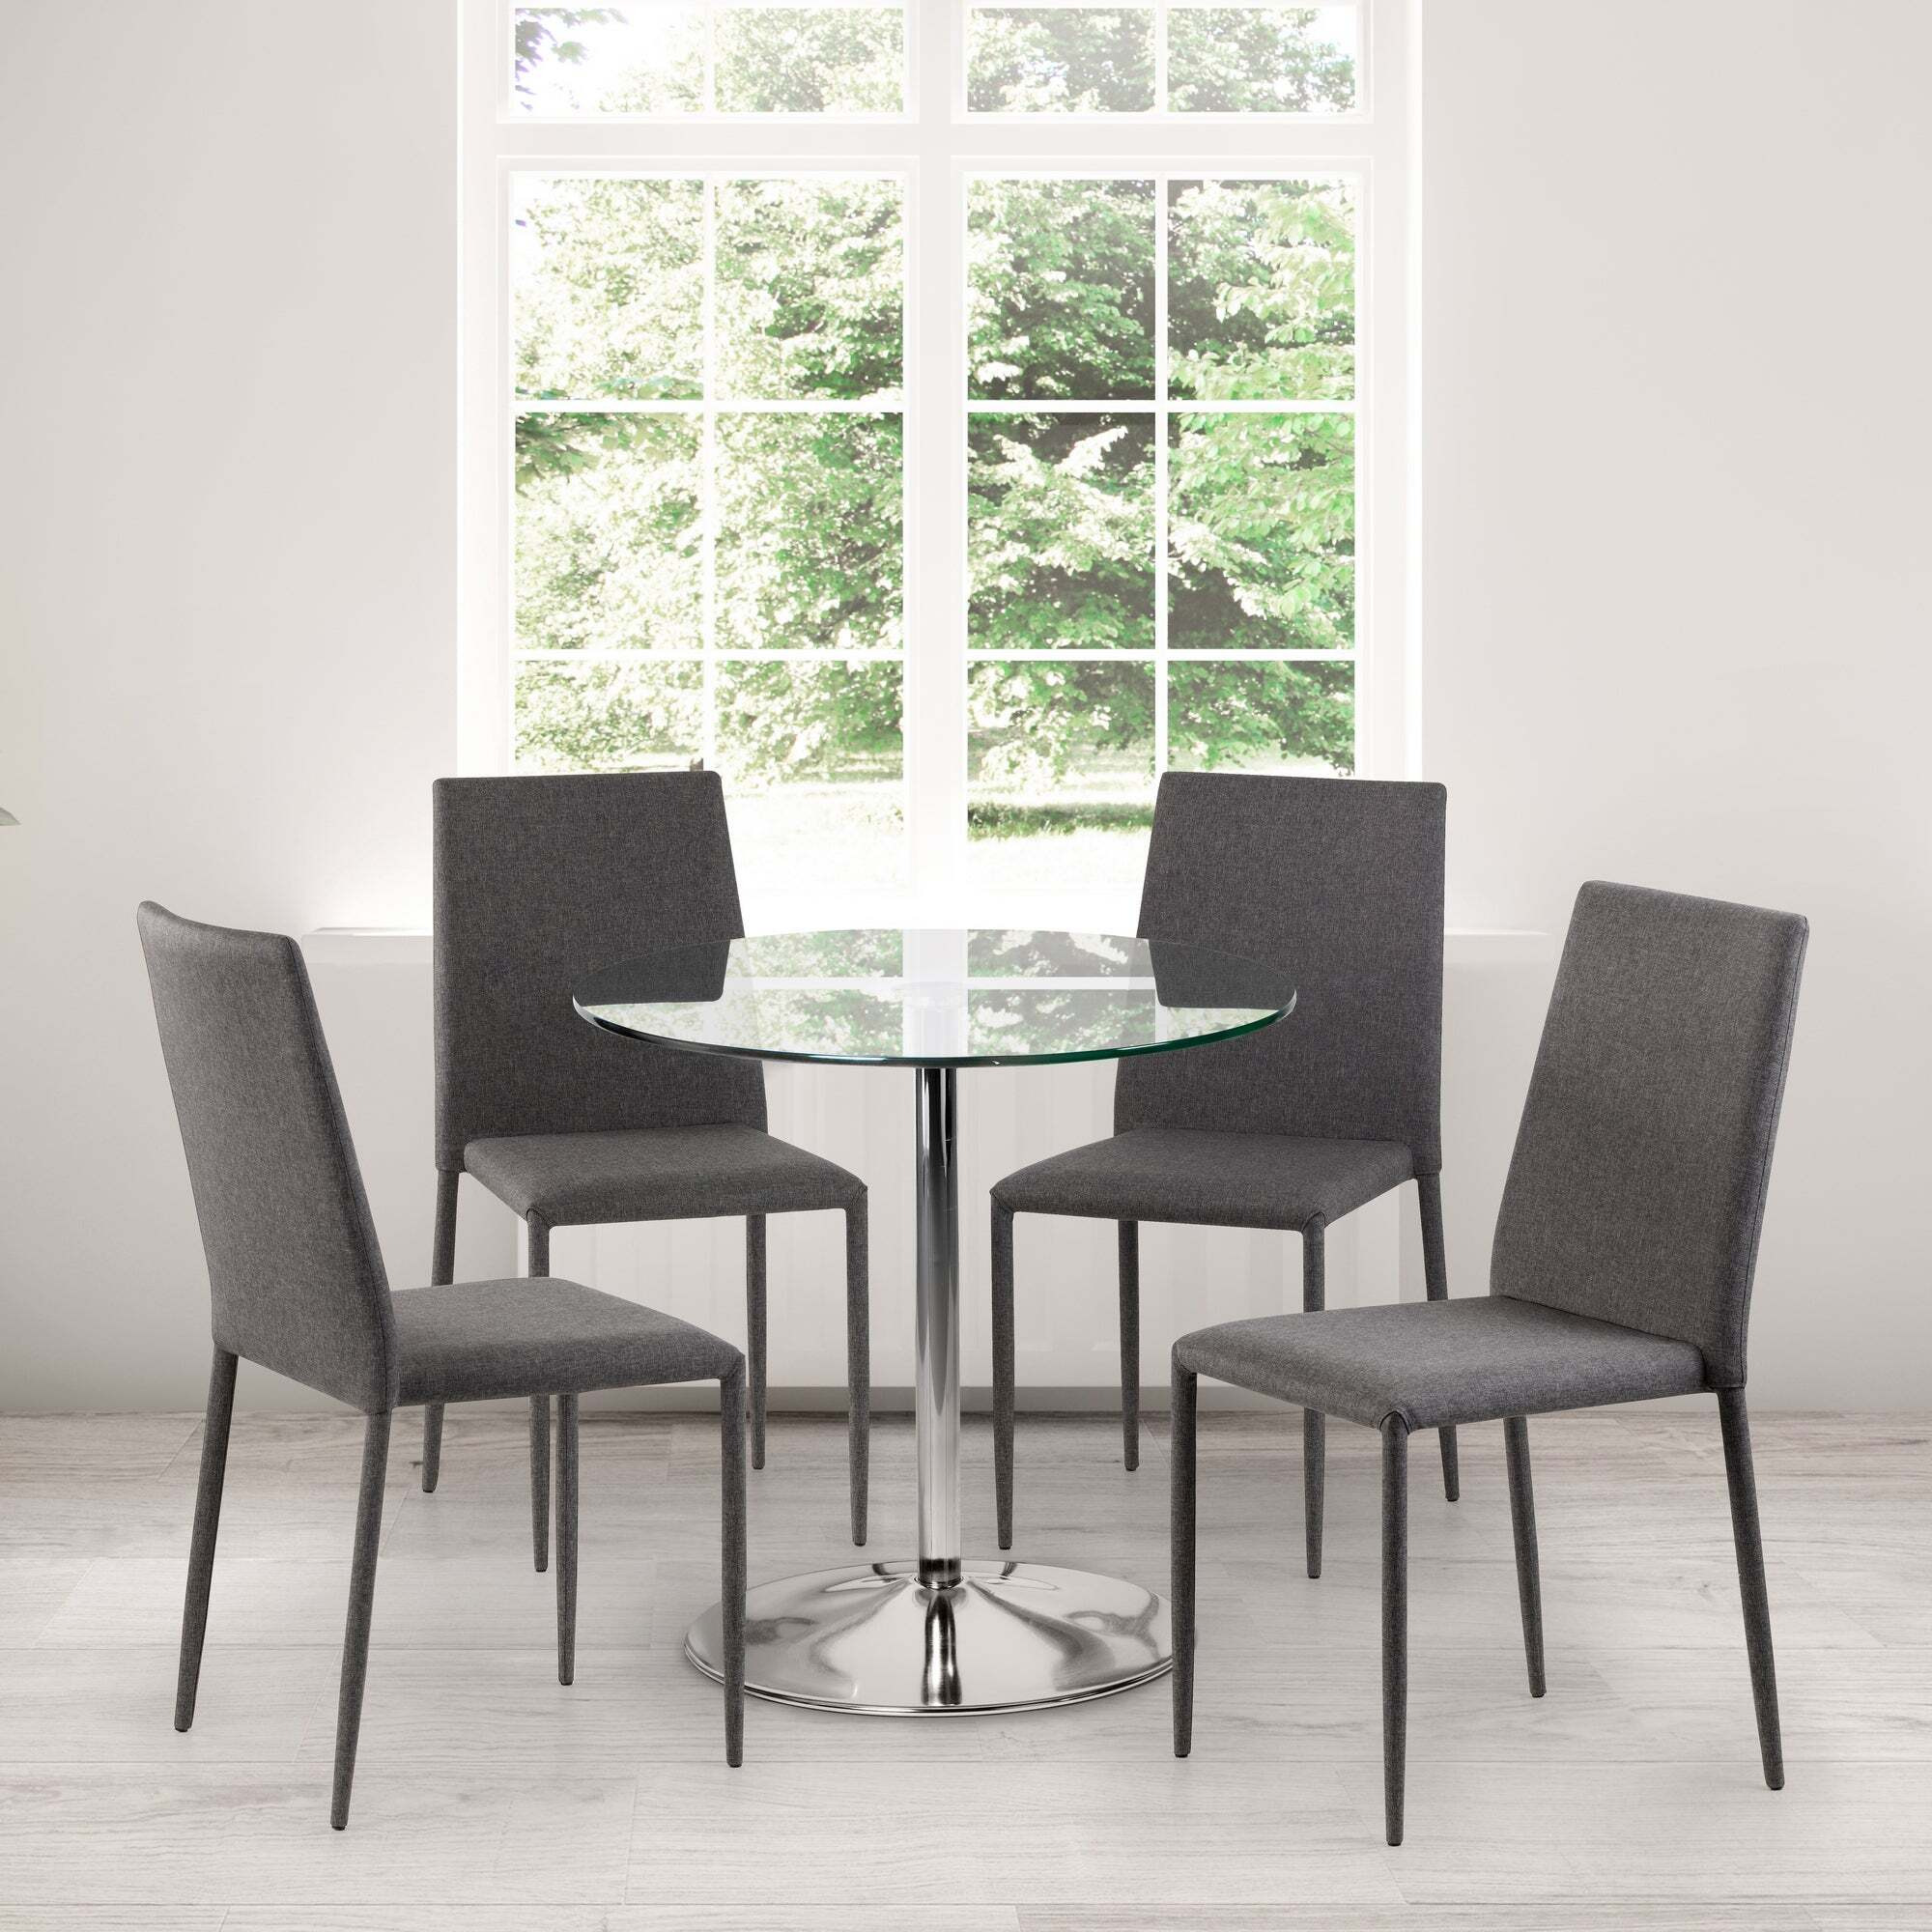 Kudos Round Pedestal Glass Top Dining Table with 4 Jazz Chairs, Chrome Chrome